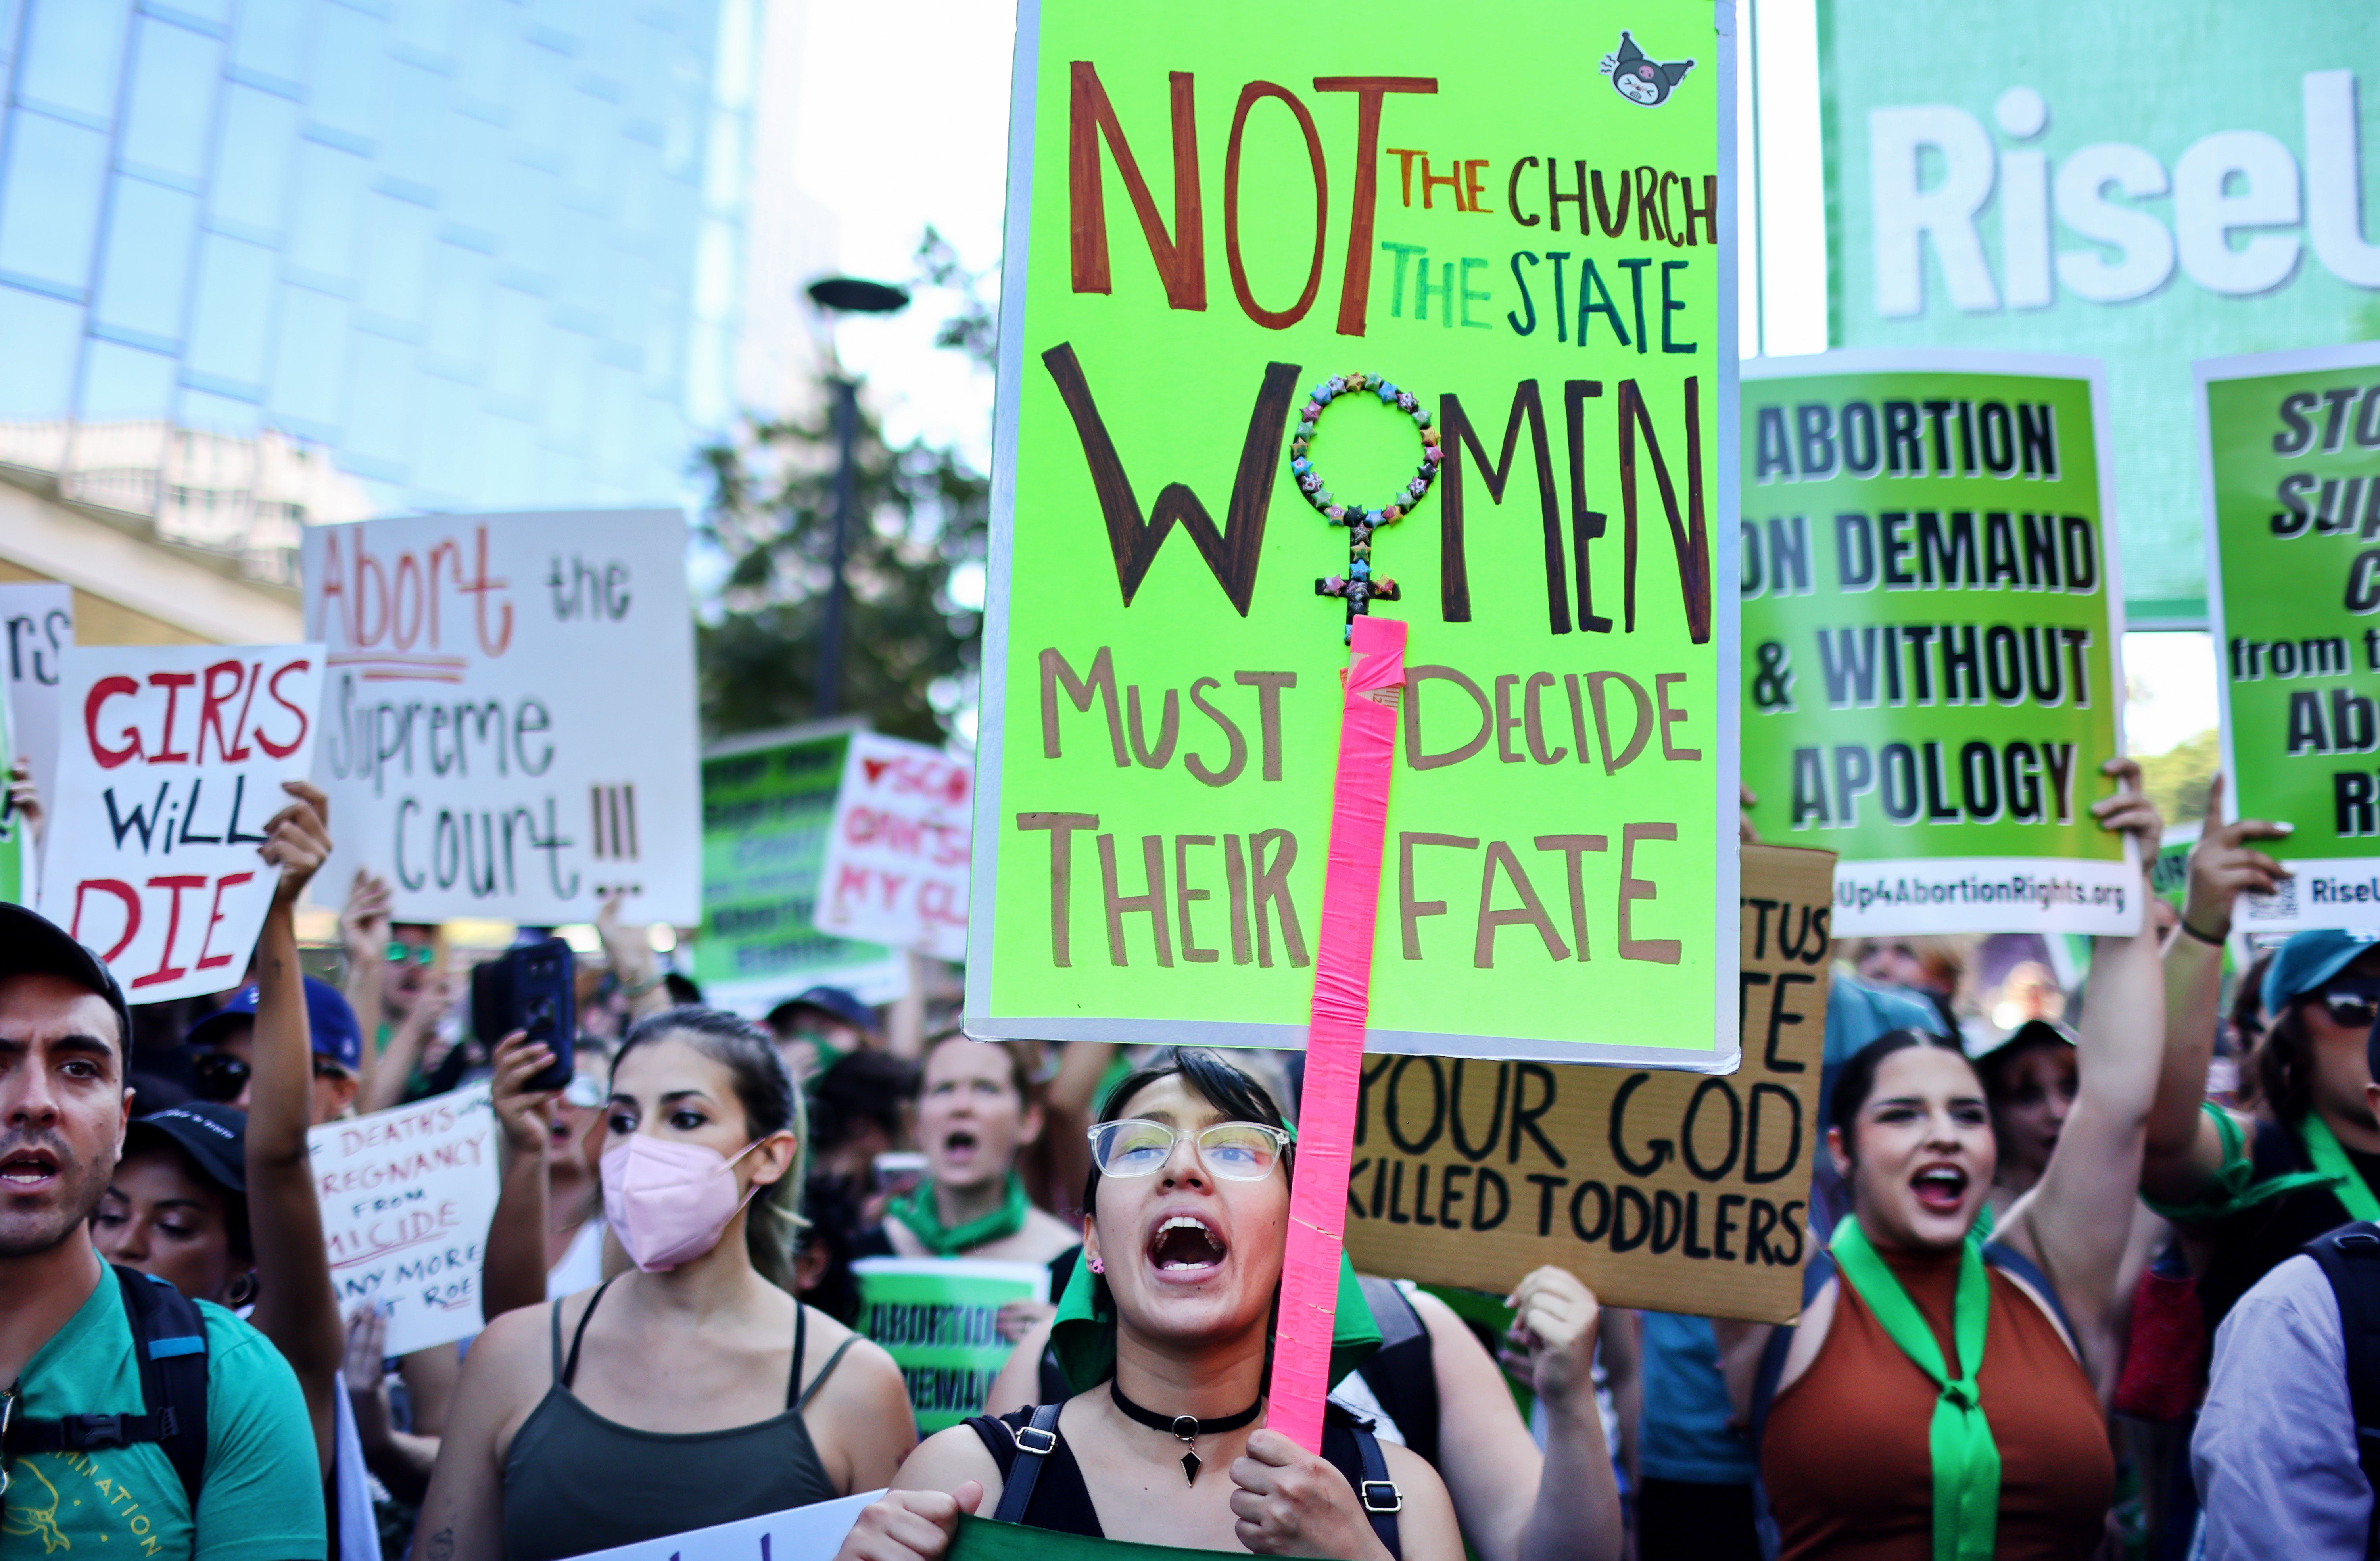 Abortion rights supporters march in Los Angeles on 27 June 2022